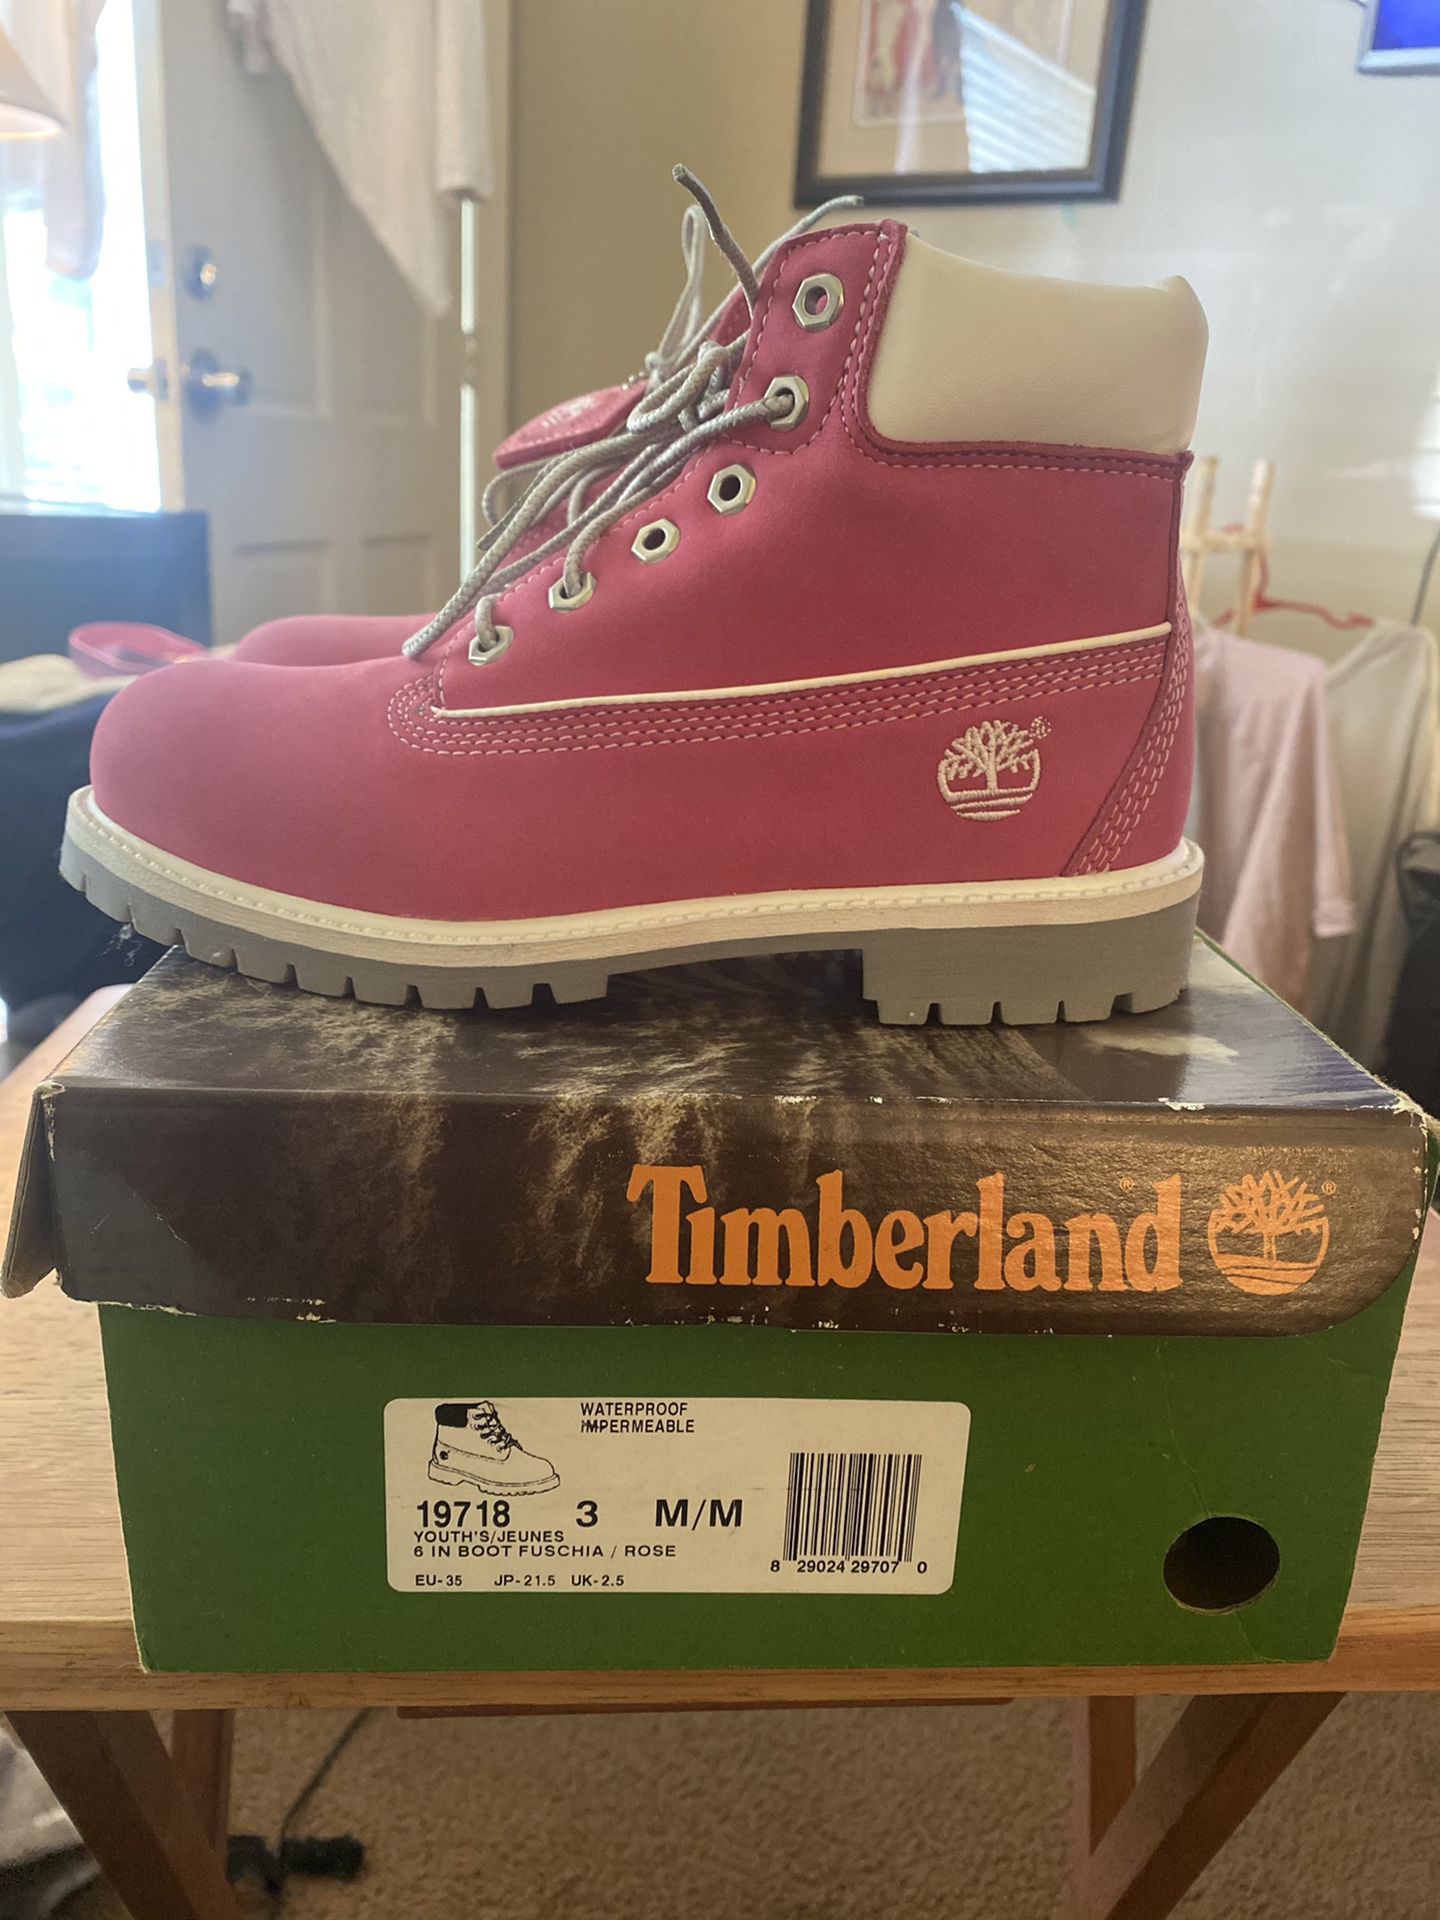 Timberland waterproof 🥾 s size 3 new DS